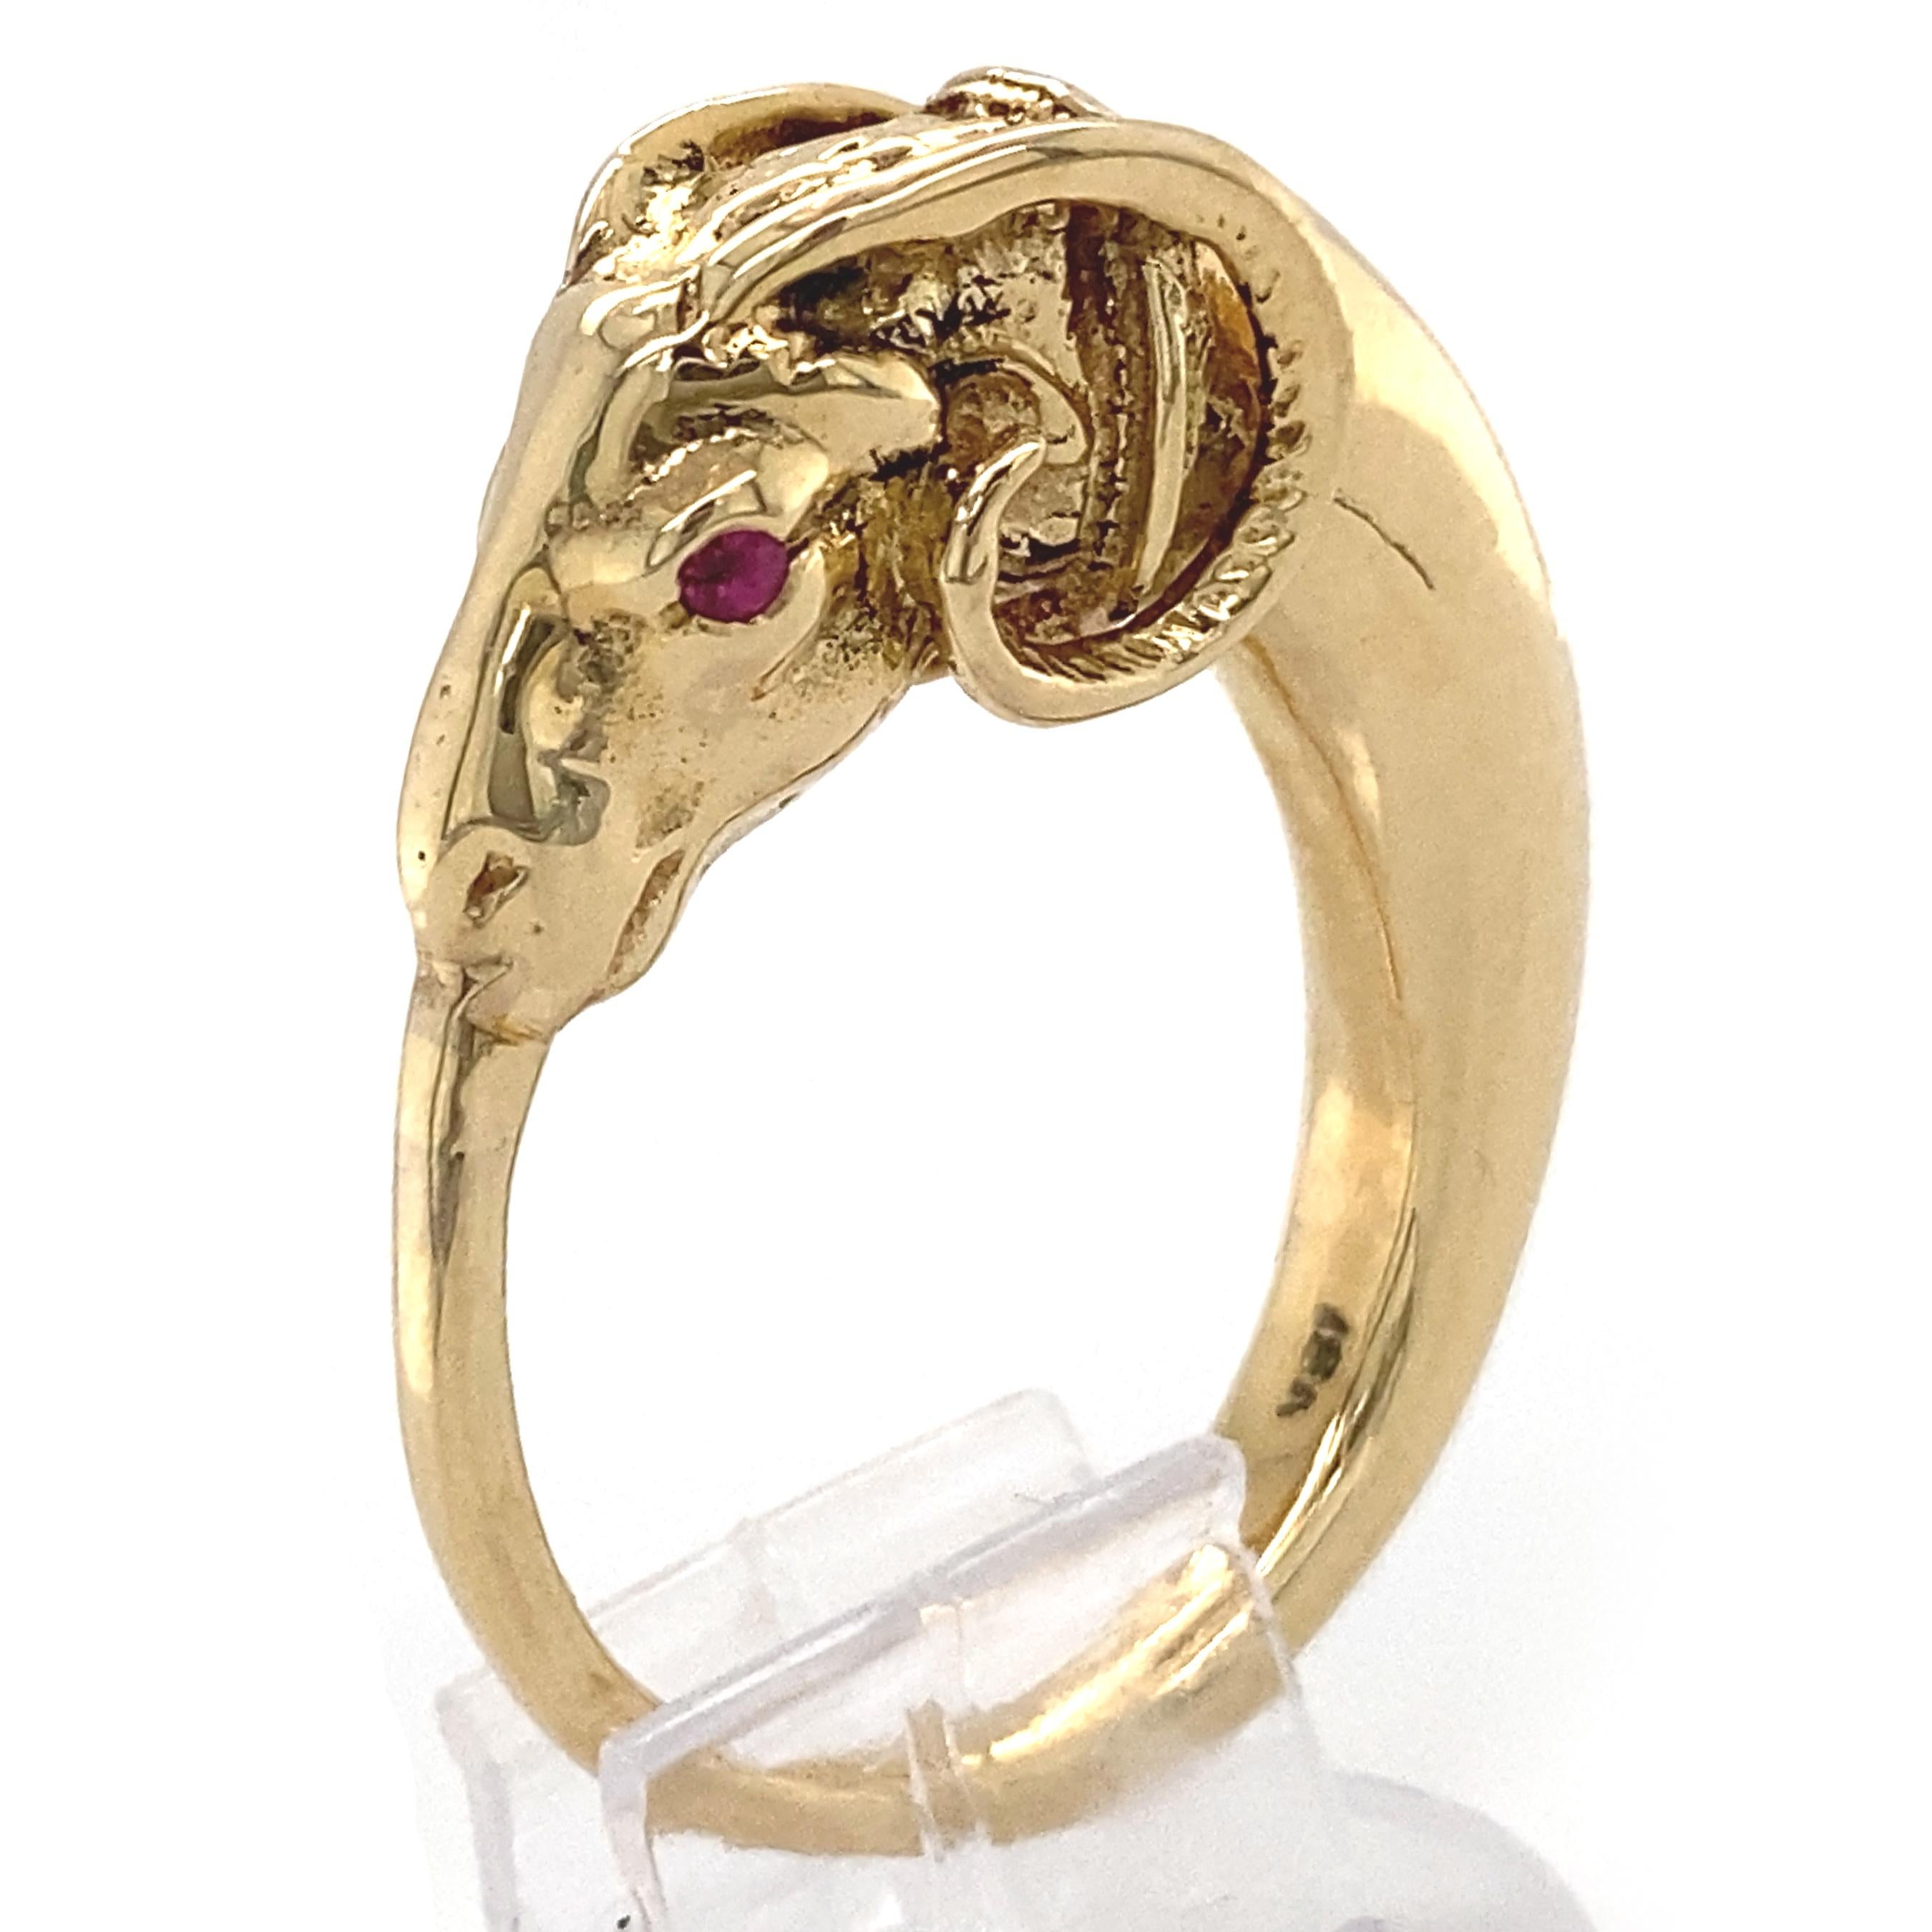 This striking figural ring is sort of a modified ouroboros -- the ancient round symbol of a snake eating its own tail -- only here the snake has the head of a ram.  This whimsical mash-up of motifs puts it squarely in the mini-Etruscan revival of